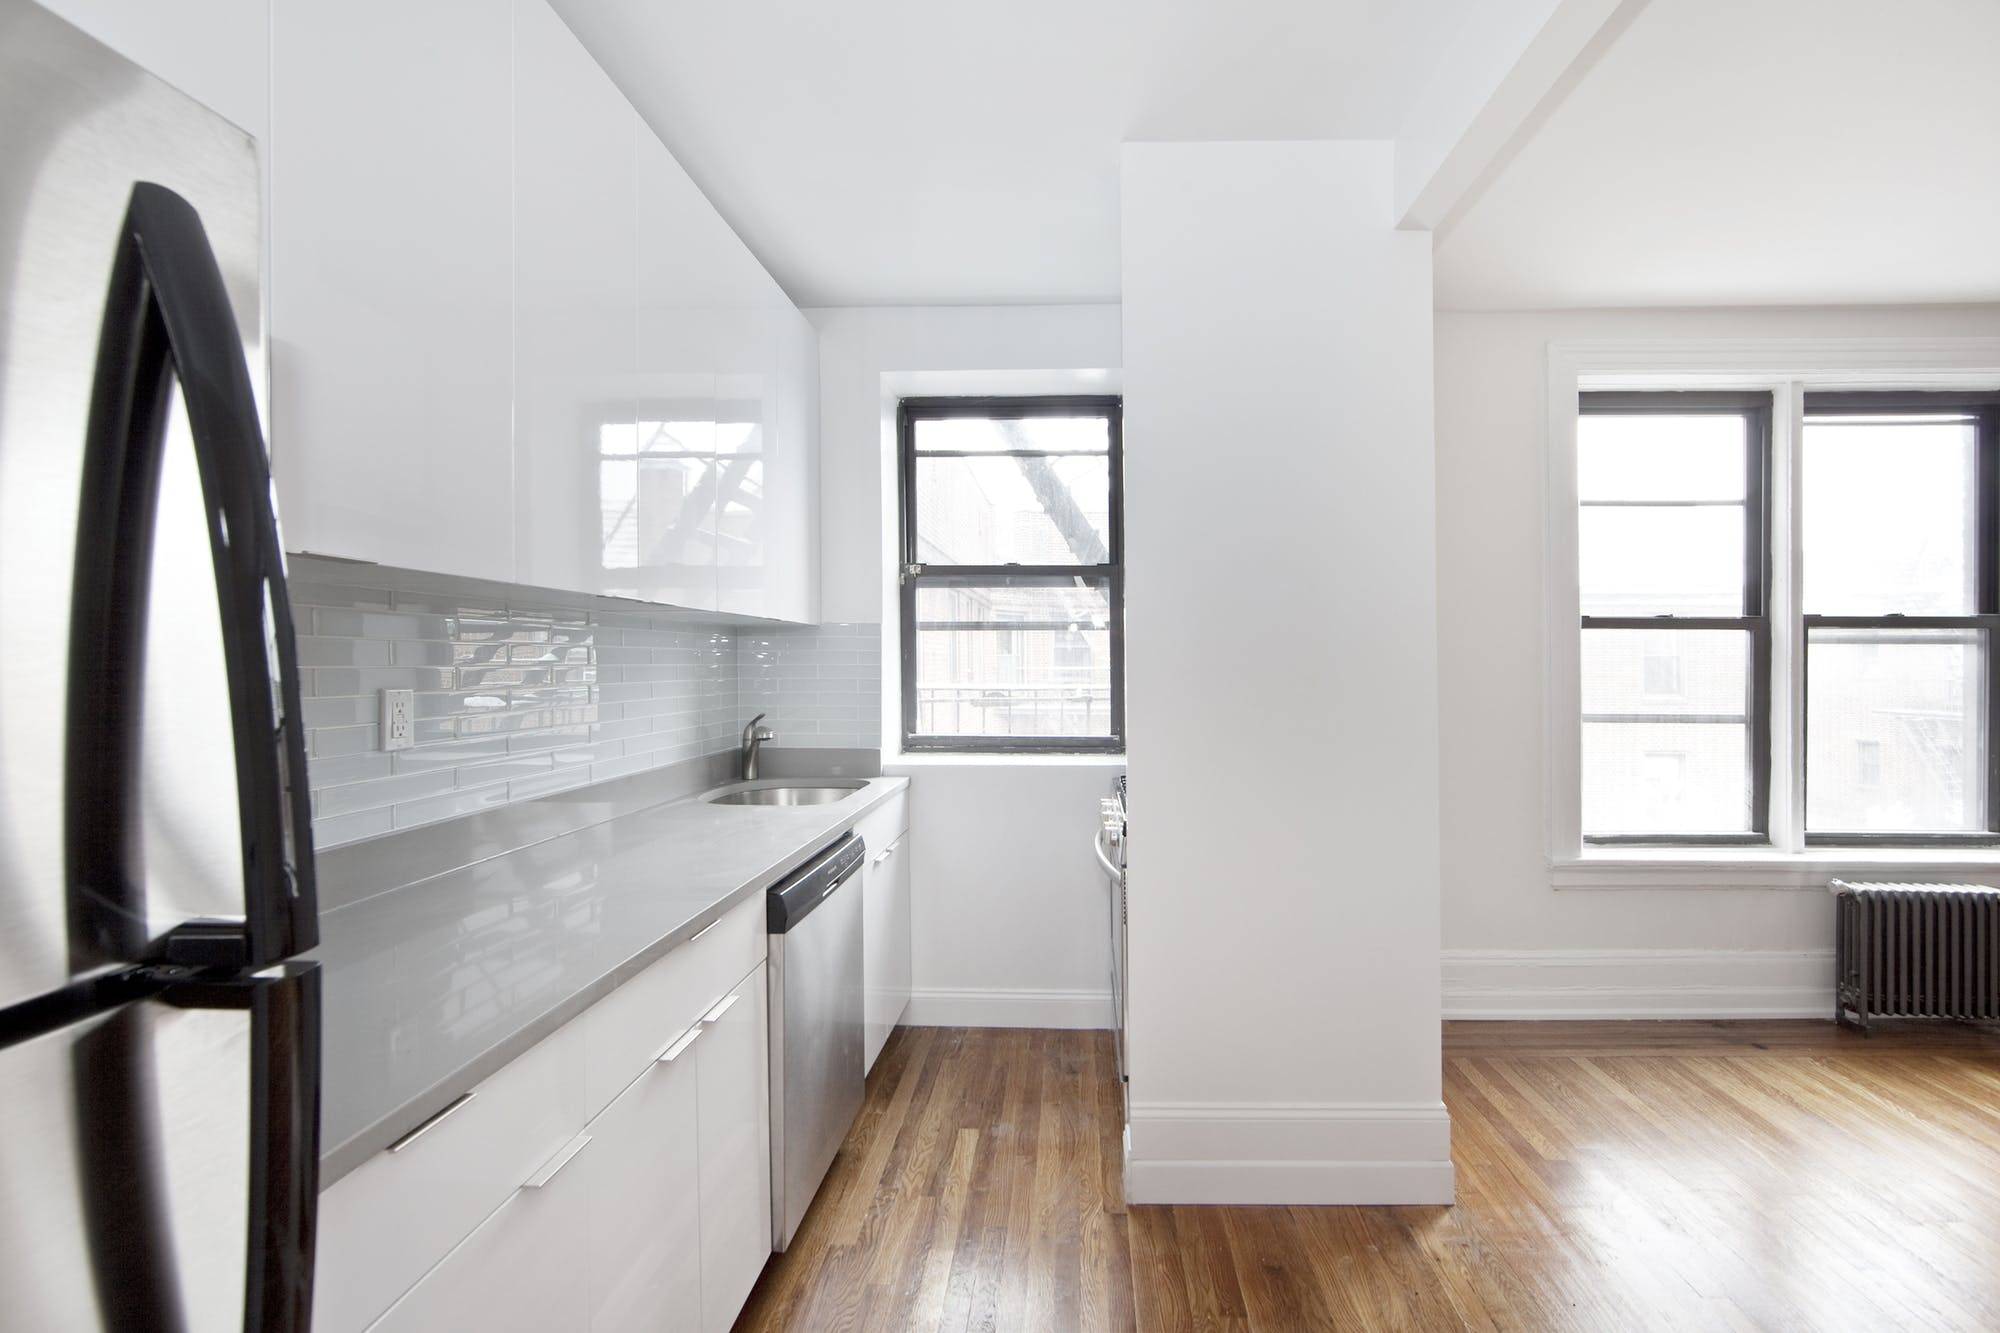 Fully renovated RENT STABILIZED apartment in Historic District of Jackson Heights.